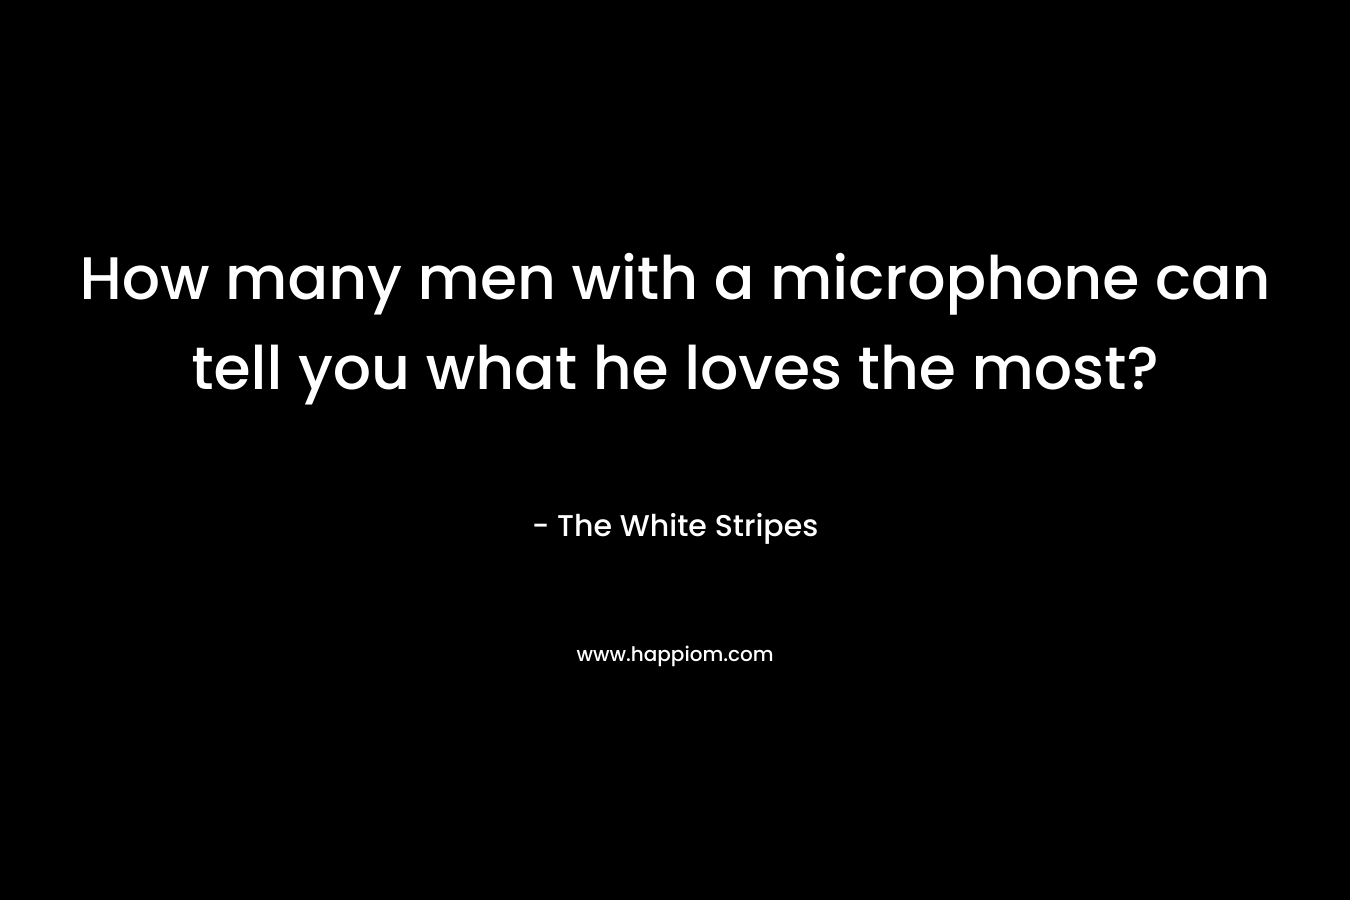 How many men with a microphone can tell you what he loves the most? – The White Stripes